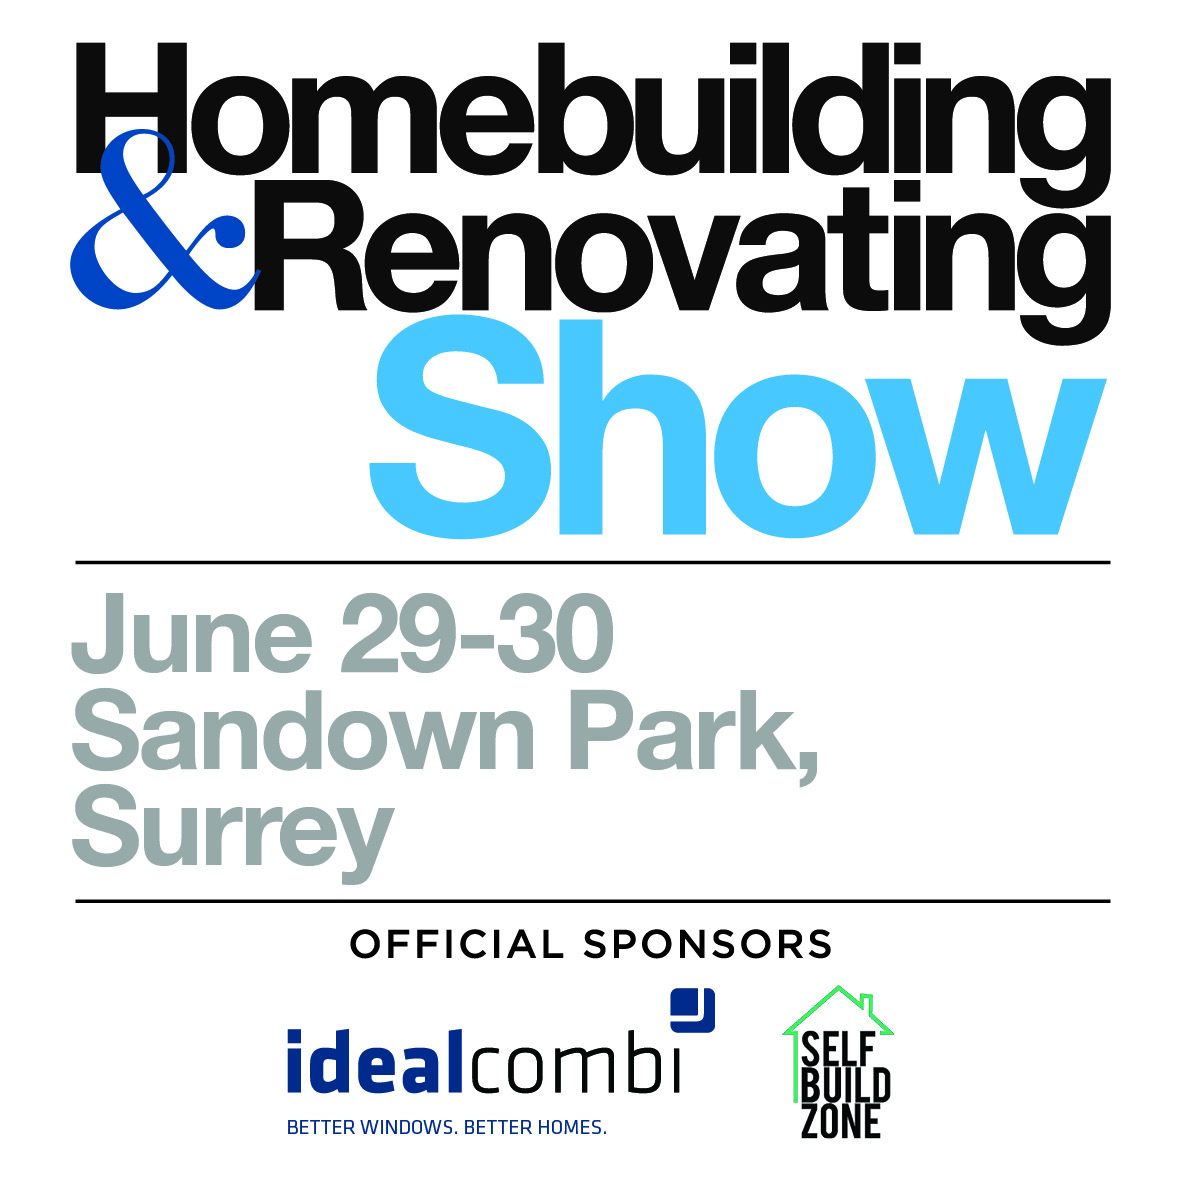 Find out how to add an extra level of enjoyment to your house at the Southern Homebuilding & Renovating Show @MyHomebuilding